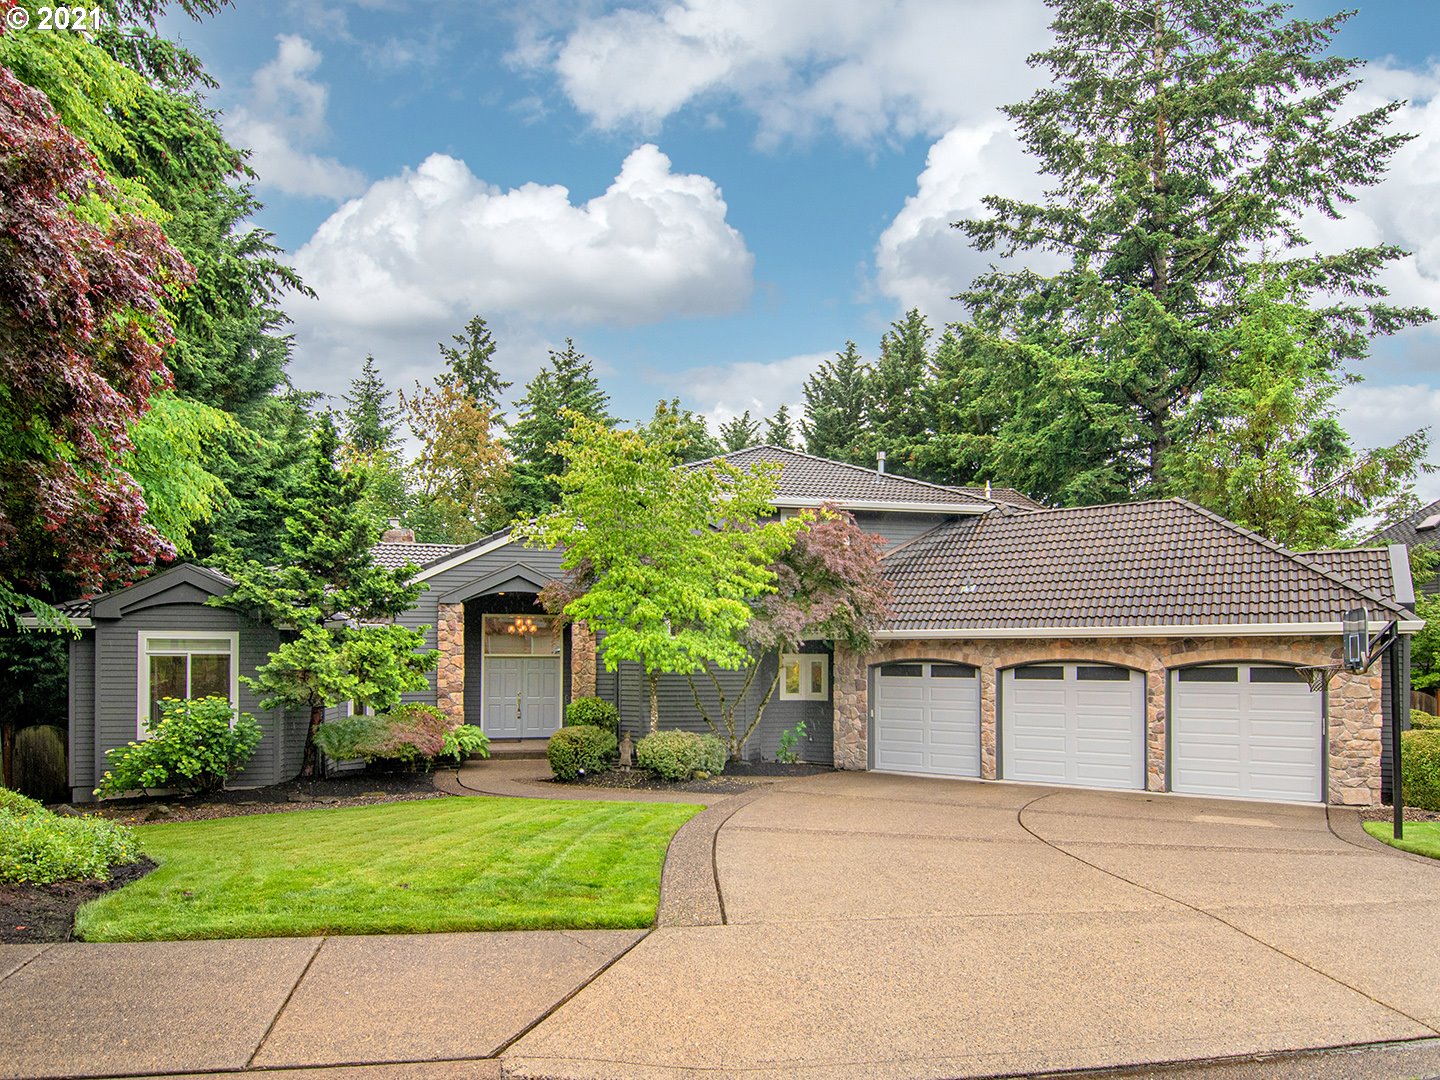 12404 NW WOODLAND CT (1 of 32)